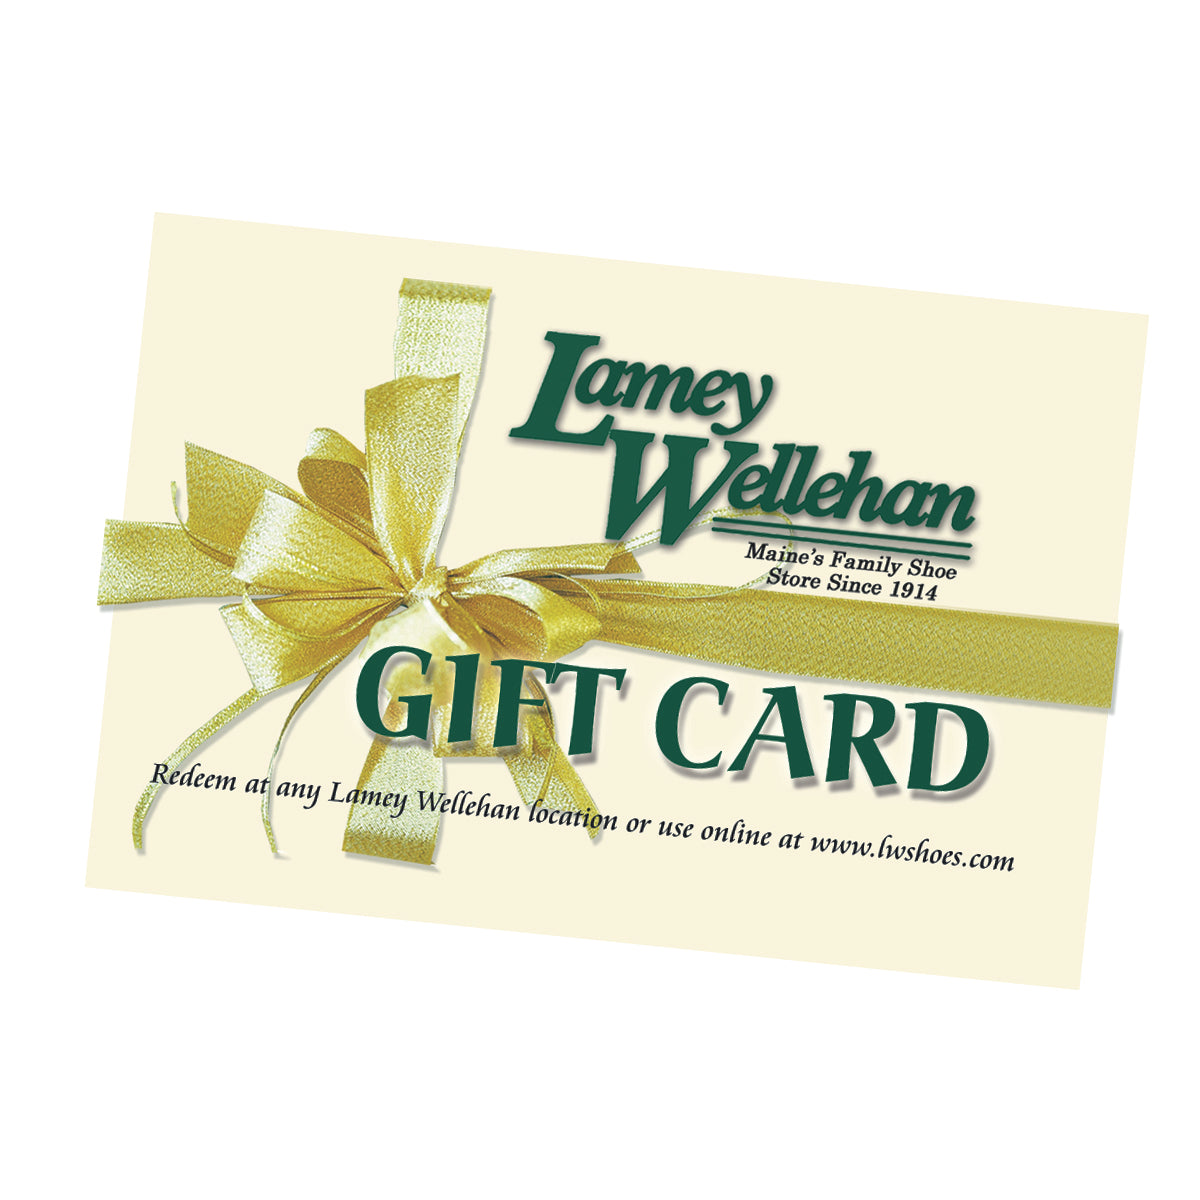 Lamey Wellehan Shoes gift card with a gold ribbon design for quality footwear at Lamey Wellehan Shoes.